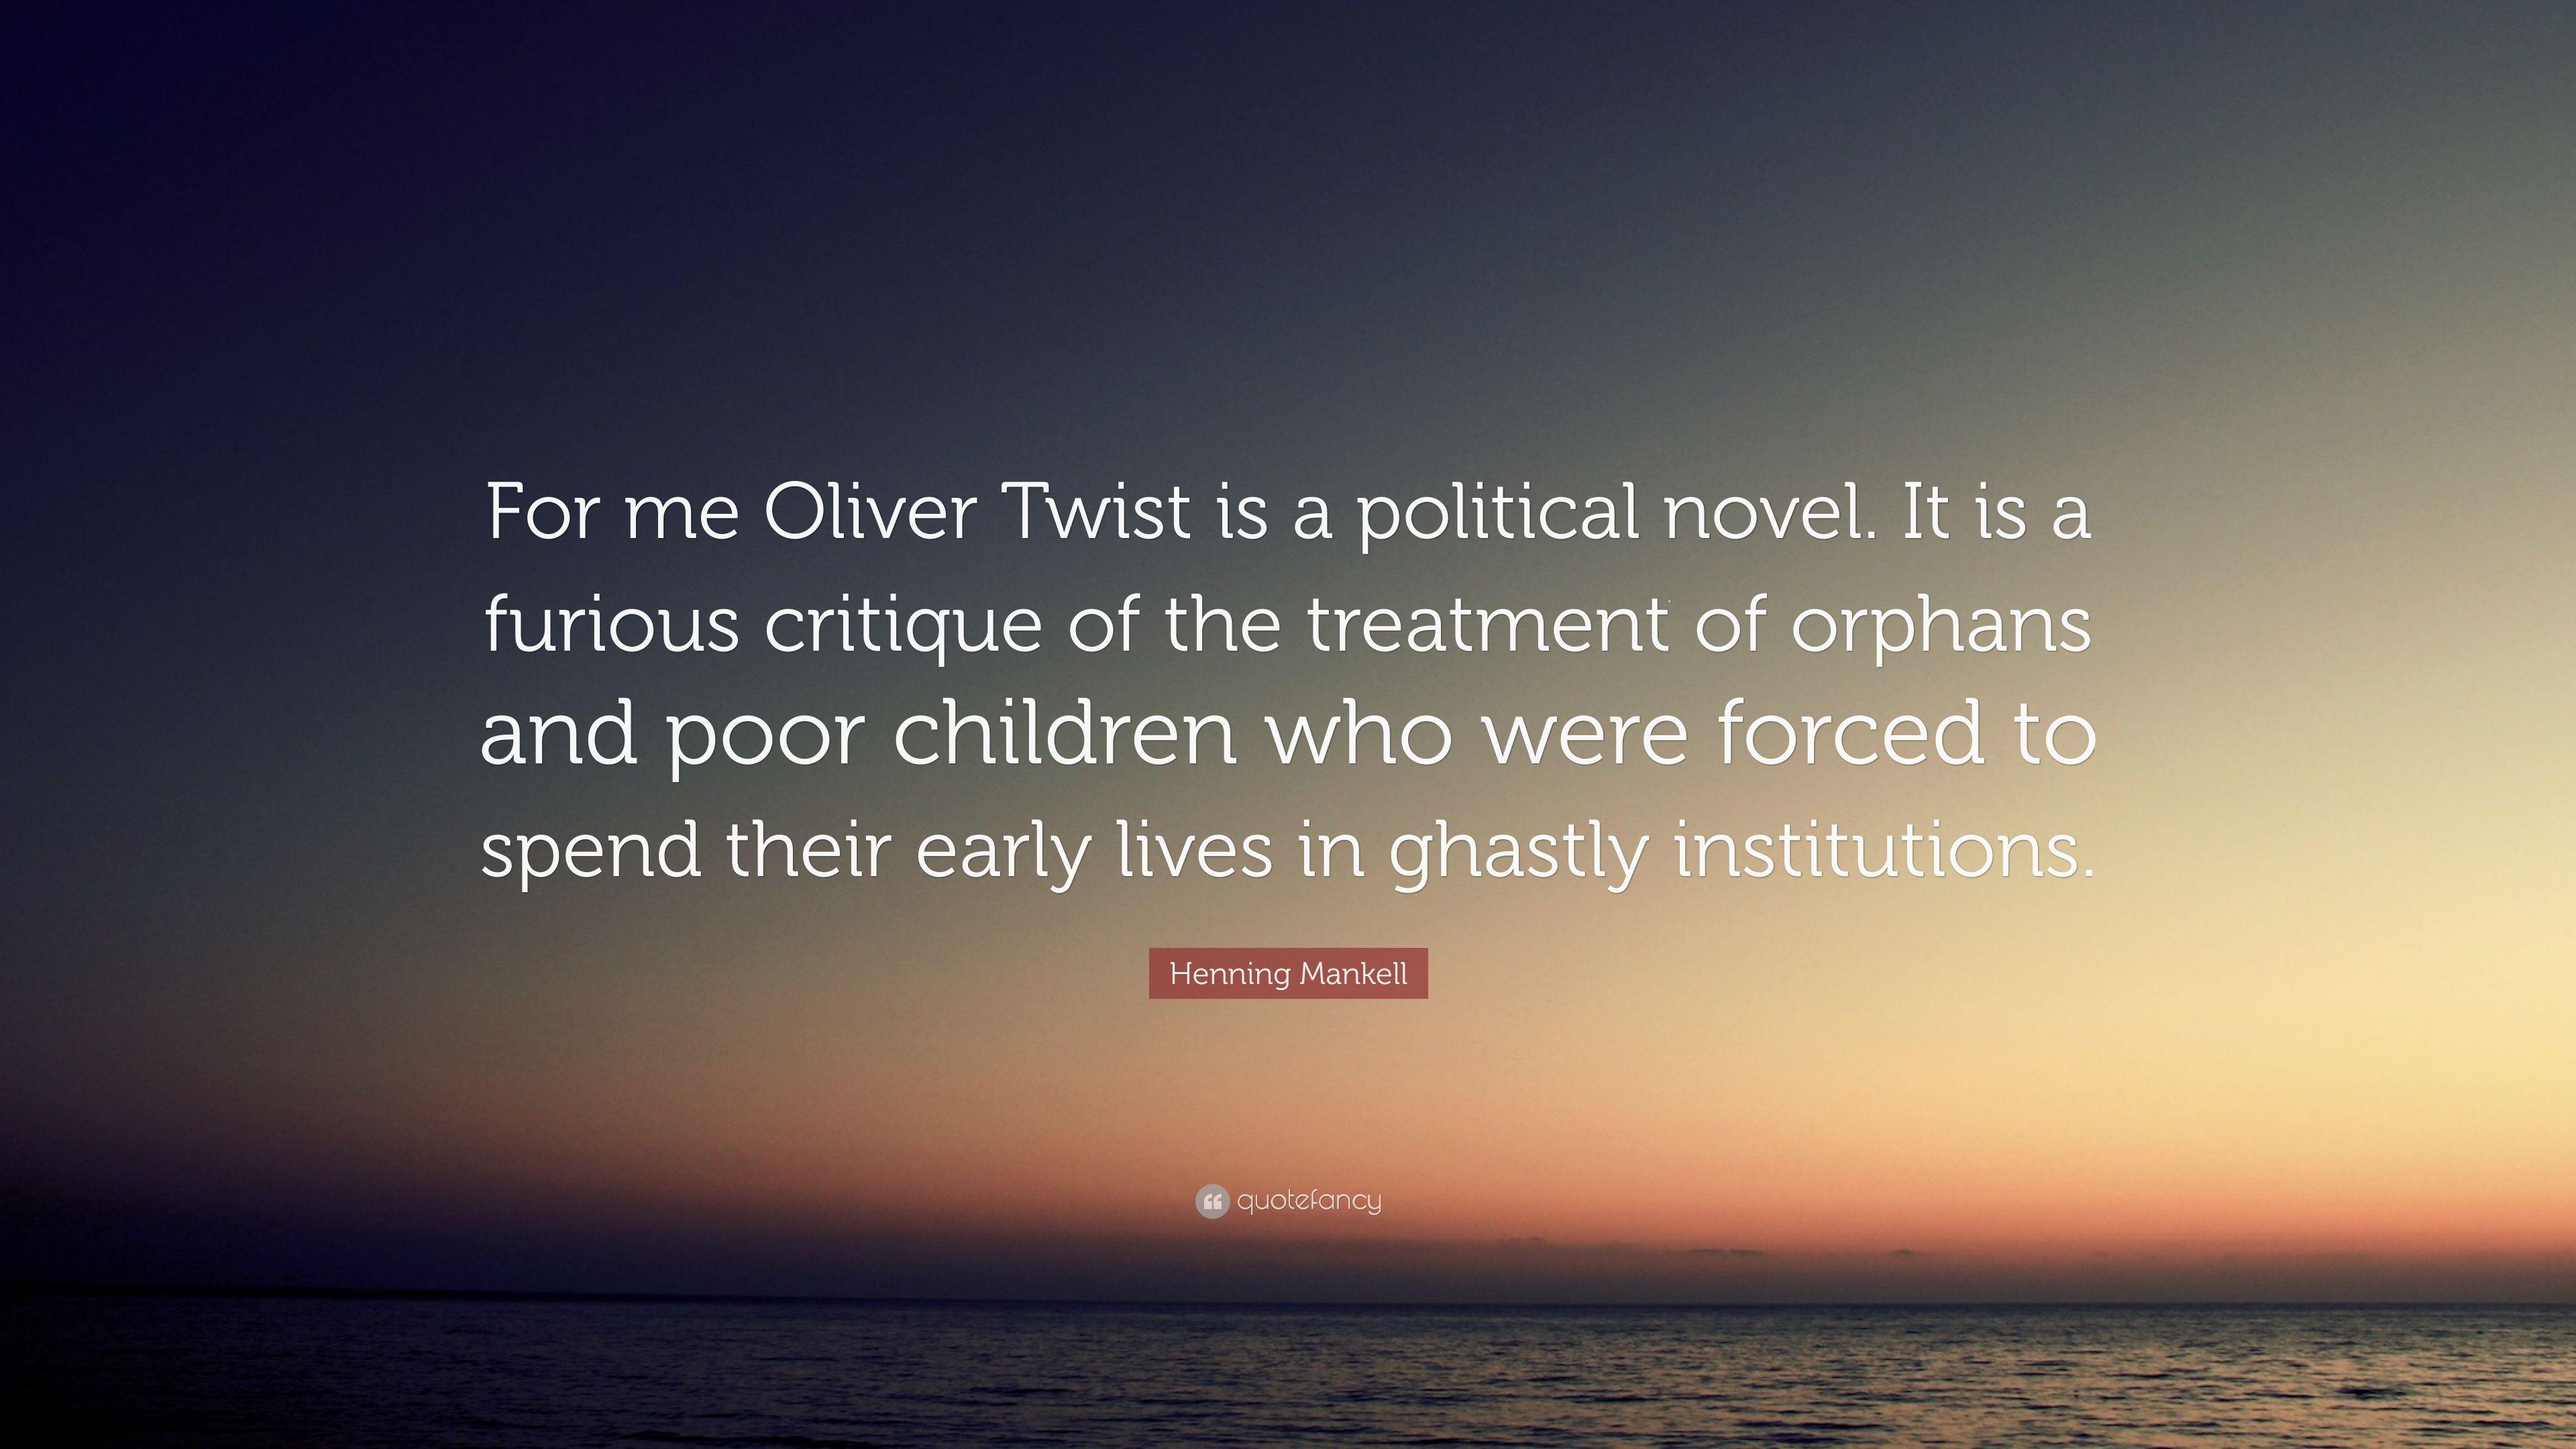 Henning Mankell Quote: “For me Oliver Twist is a political novel